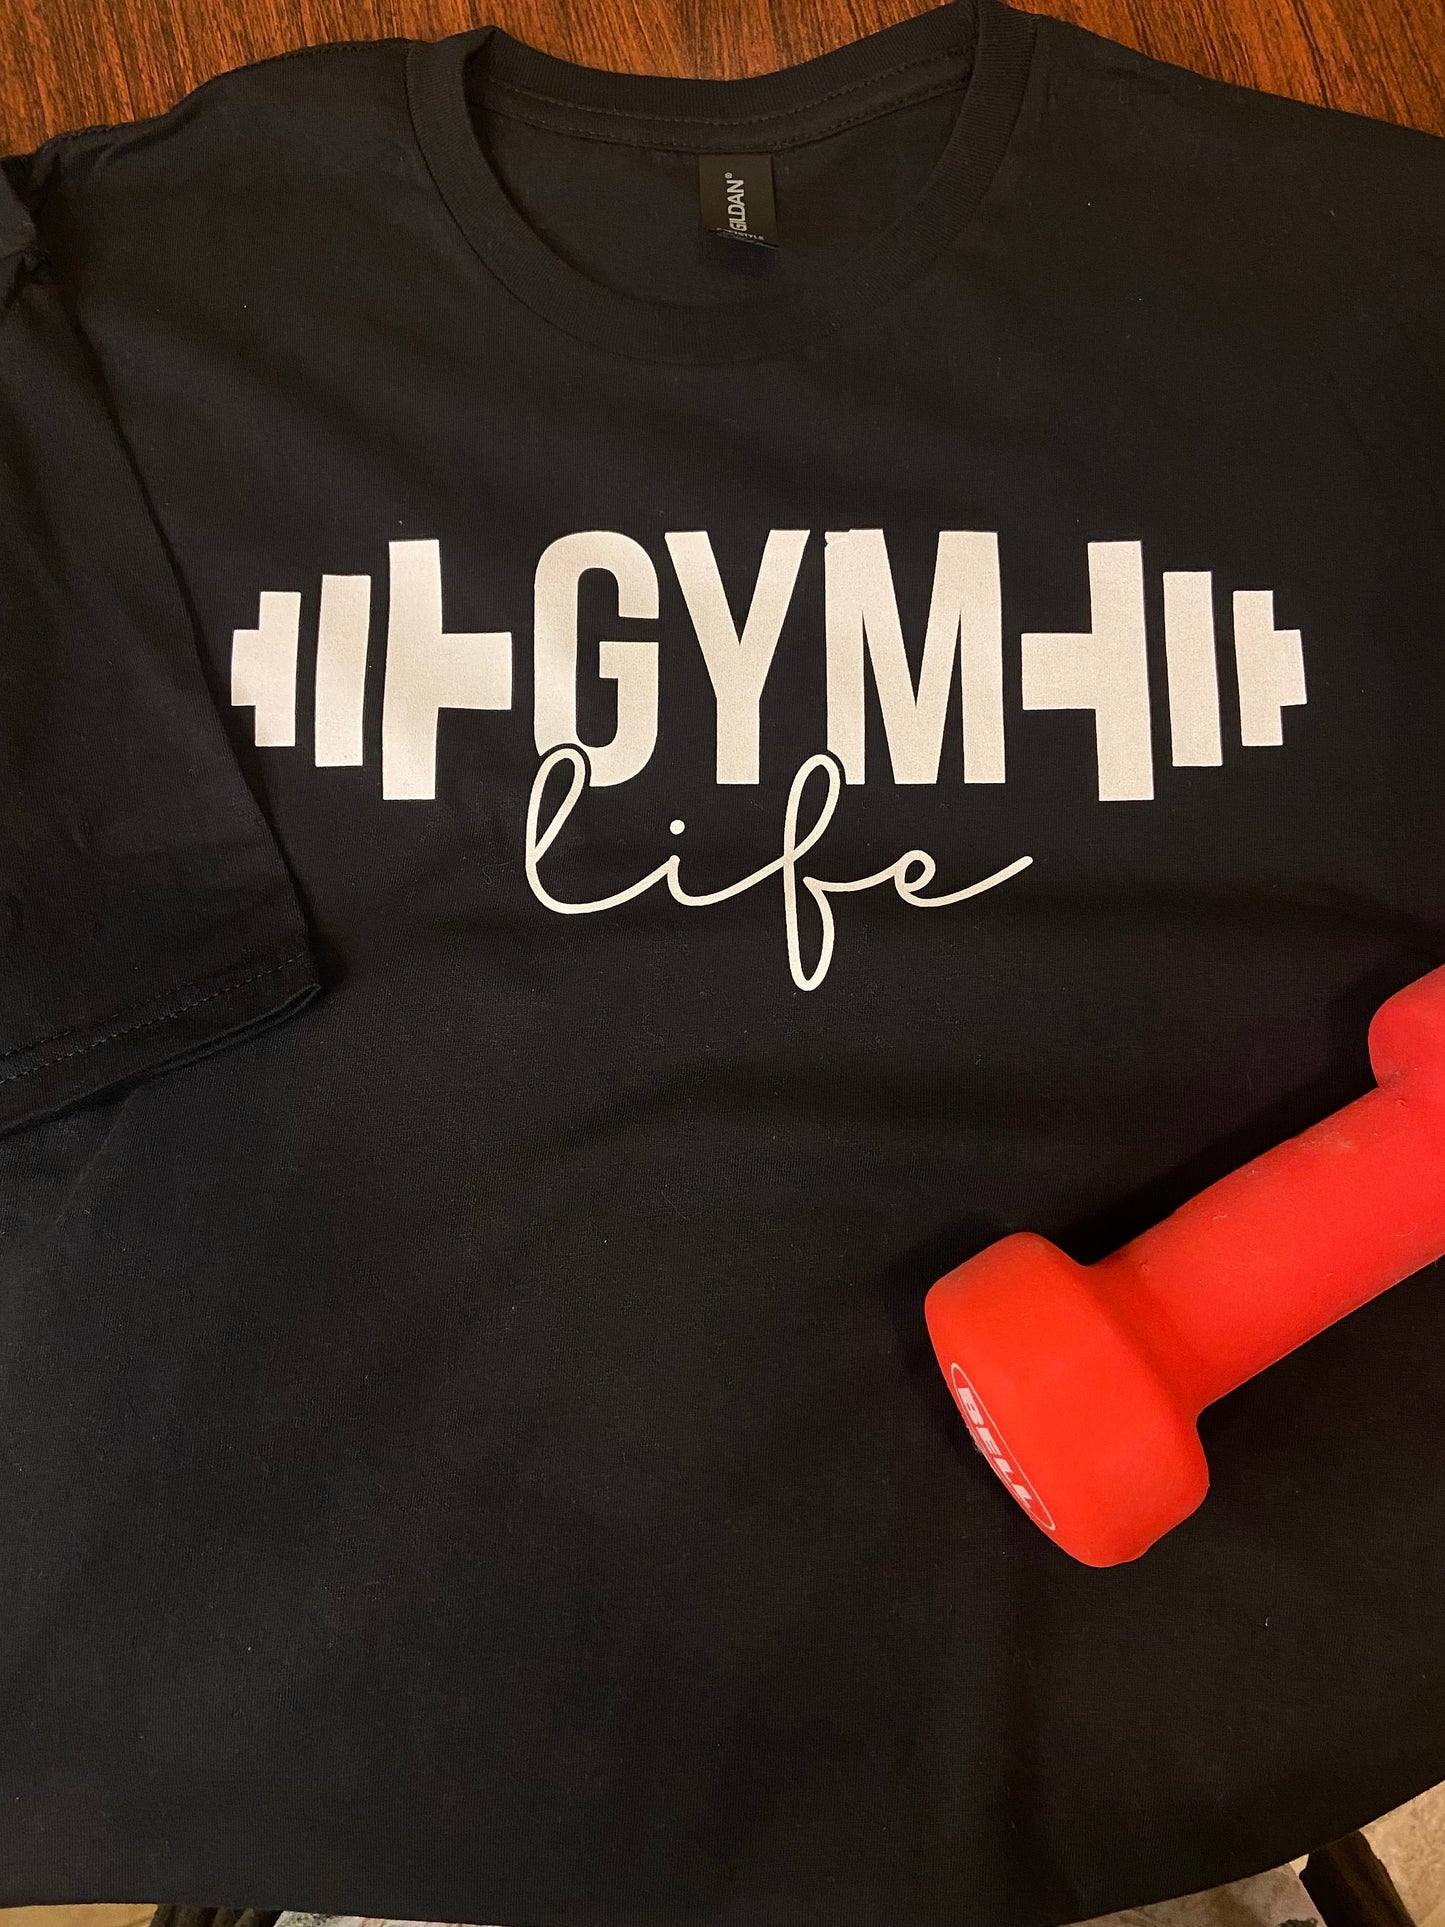 Gym Life shirt, Perfect shirt for the Gym, Graphic Tee Shirt, unisex sizing for comfy fit